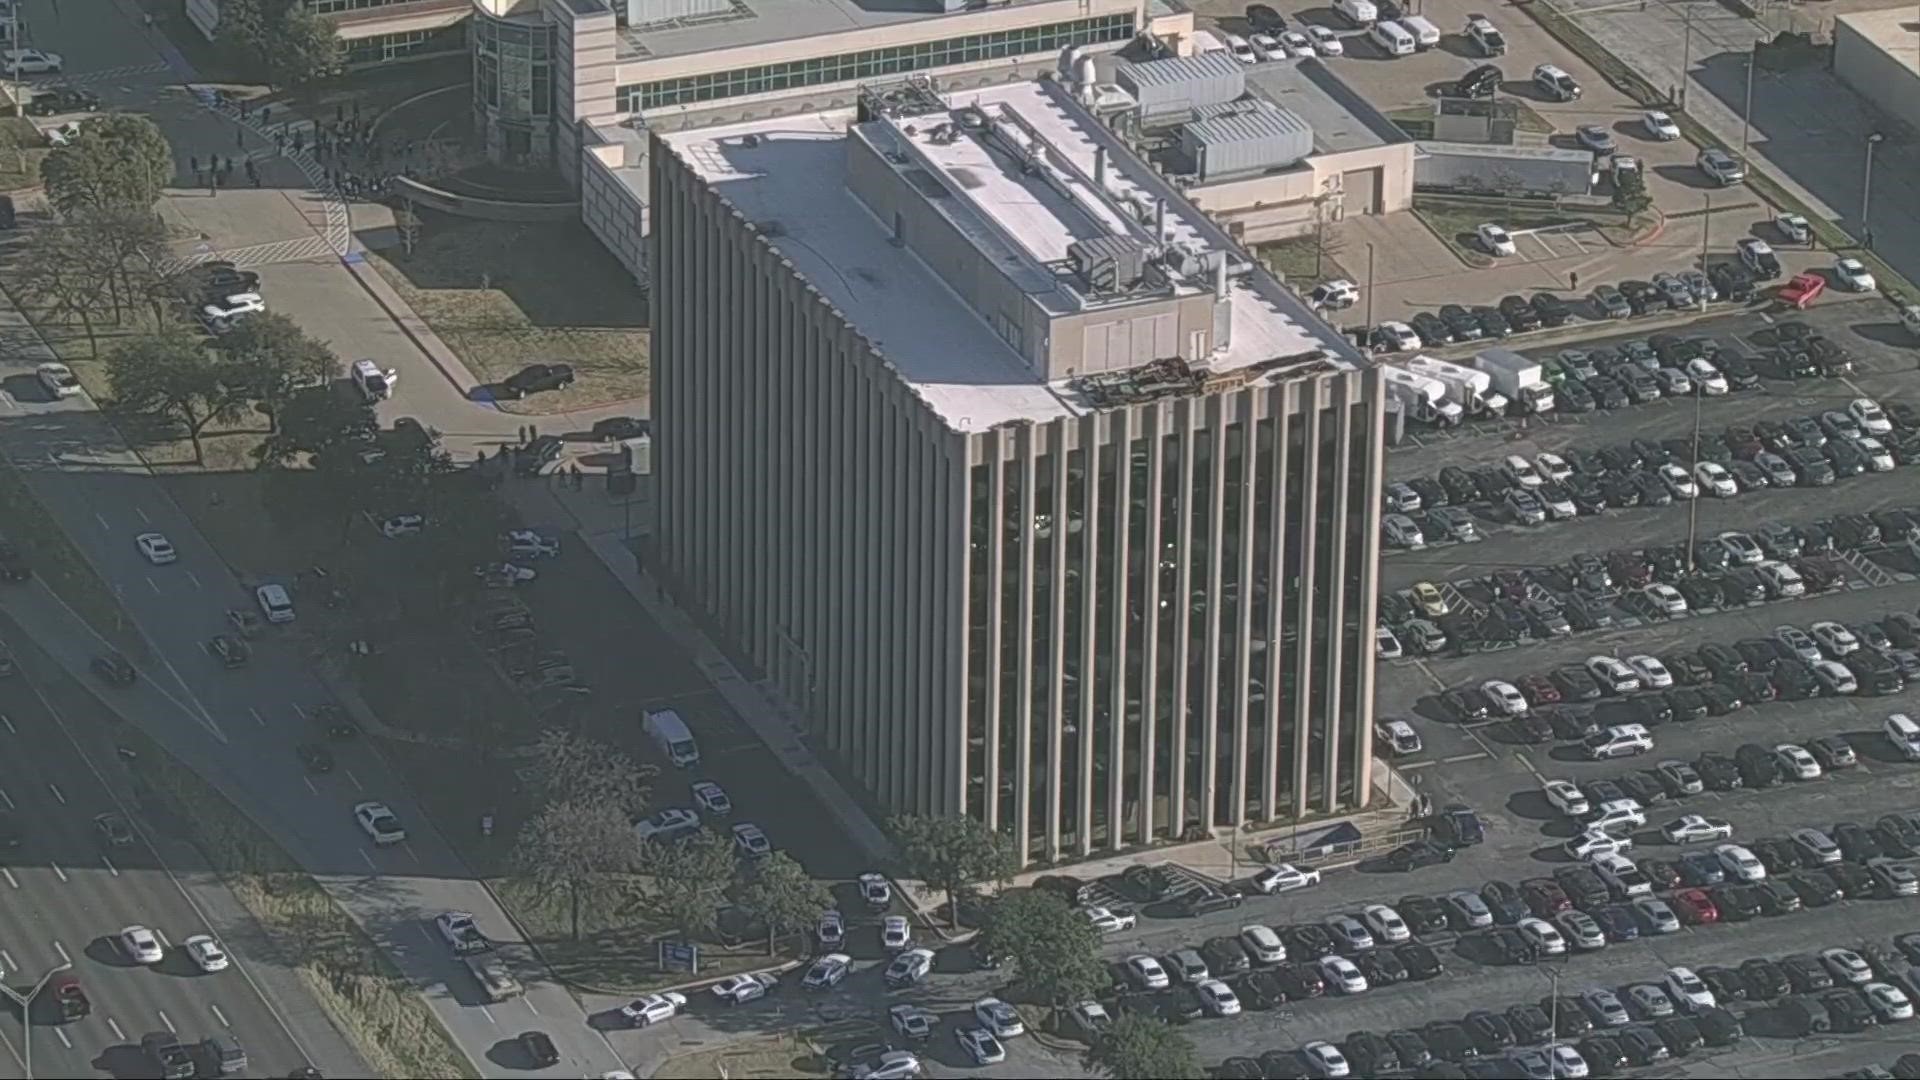 dallas-county-health-department-building-on-lockdown-after-reports-of